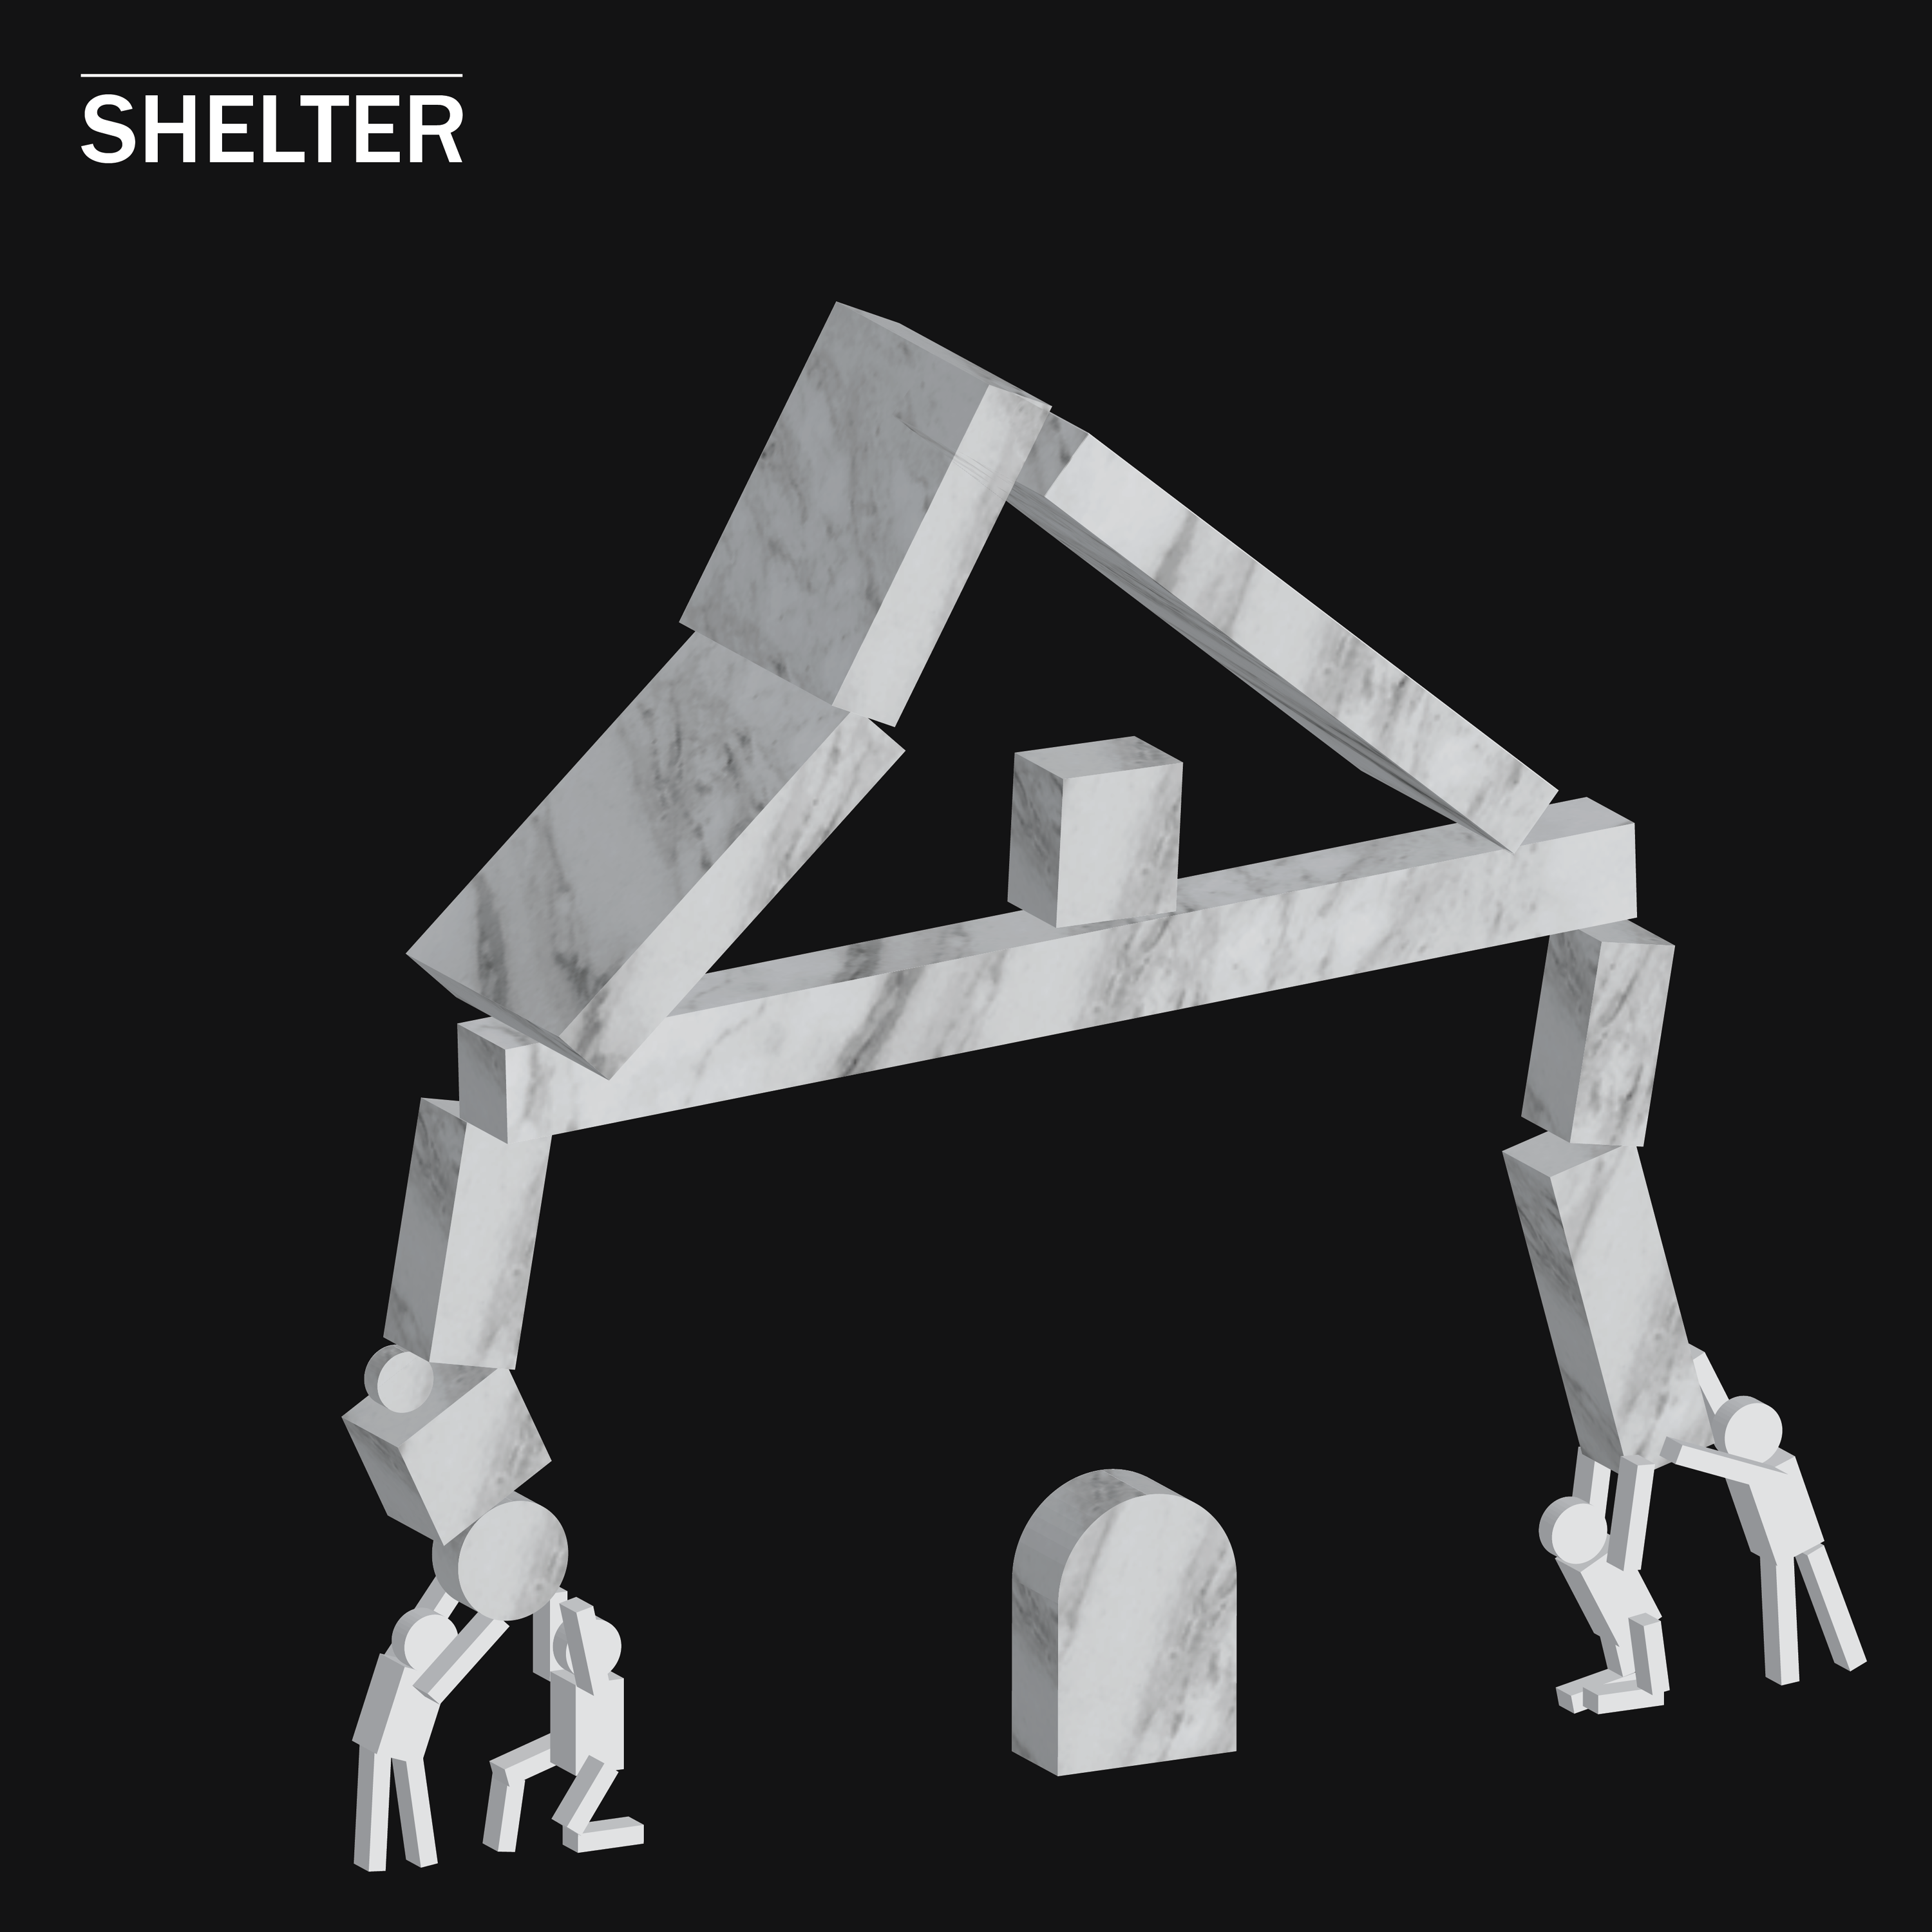 What Shelter Means to Me